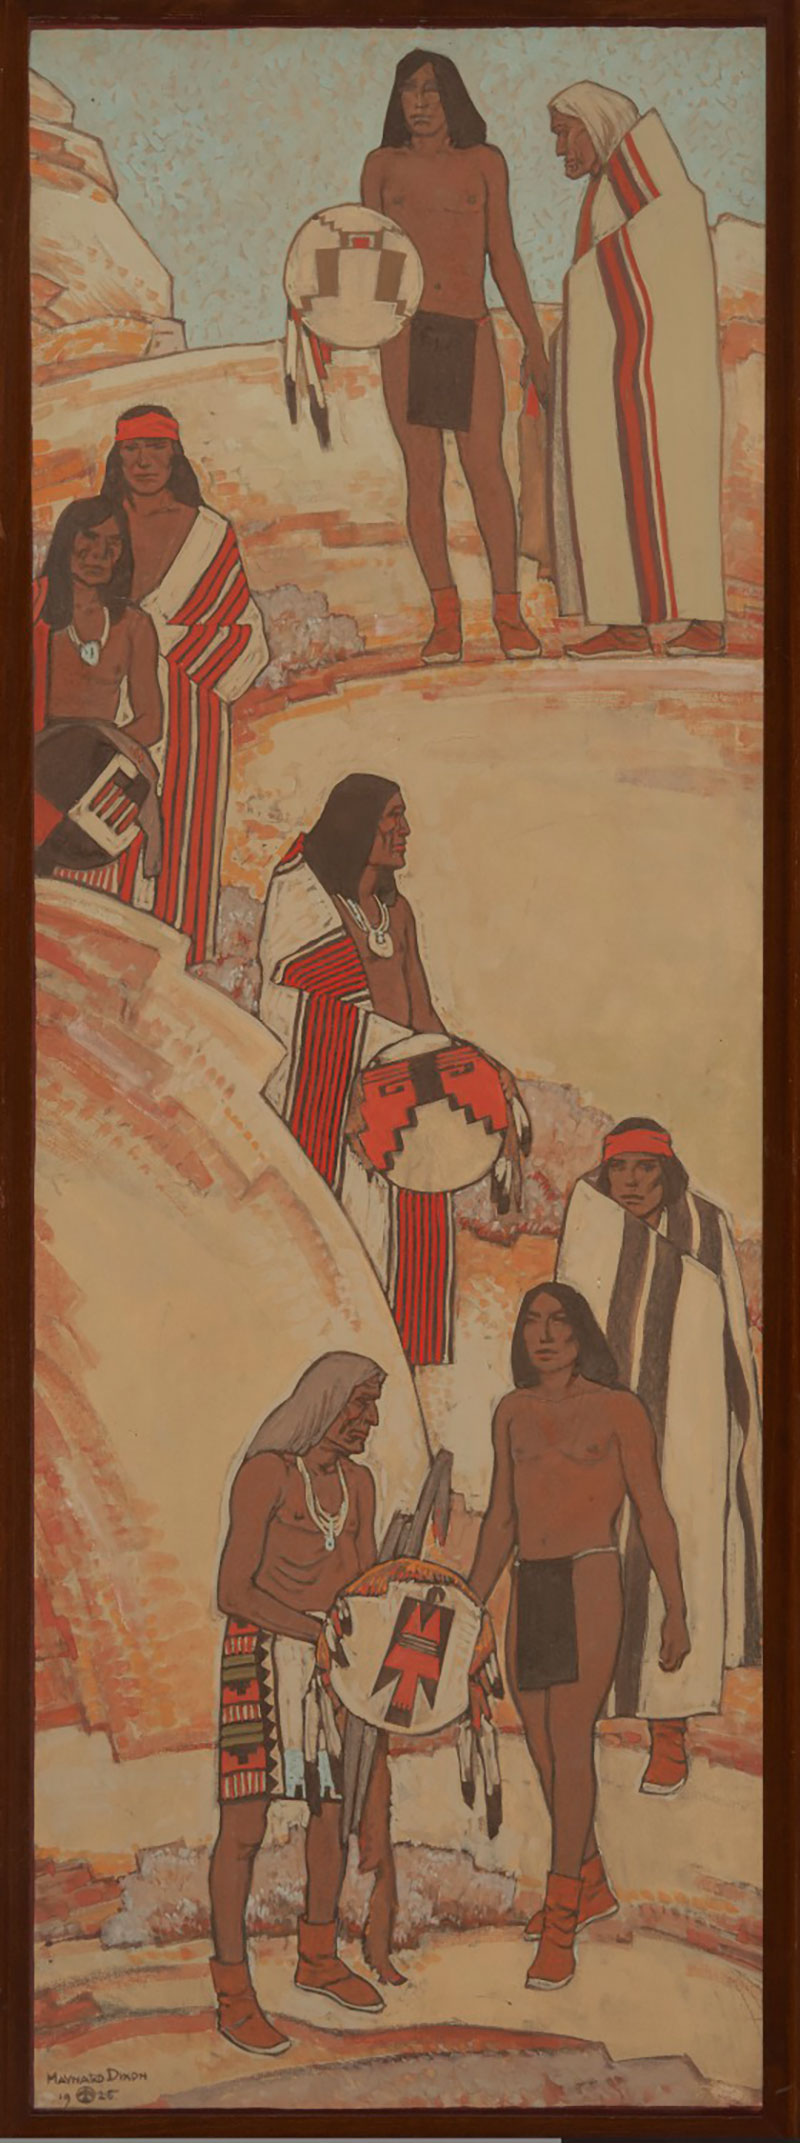 Maynard Dixon, Hopi Men, Study for the mural (Hombres hopi, estudio para el mural), 1925. Gouache, board. Museum purchase with funds provided by Western Art Associates.